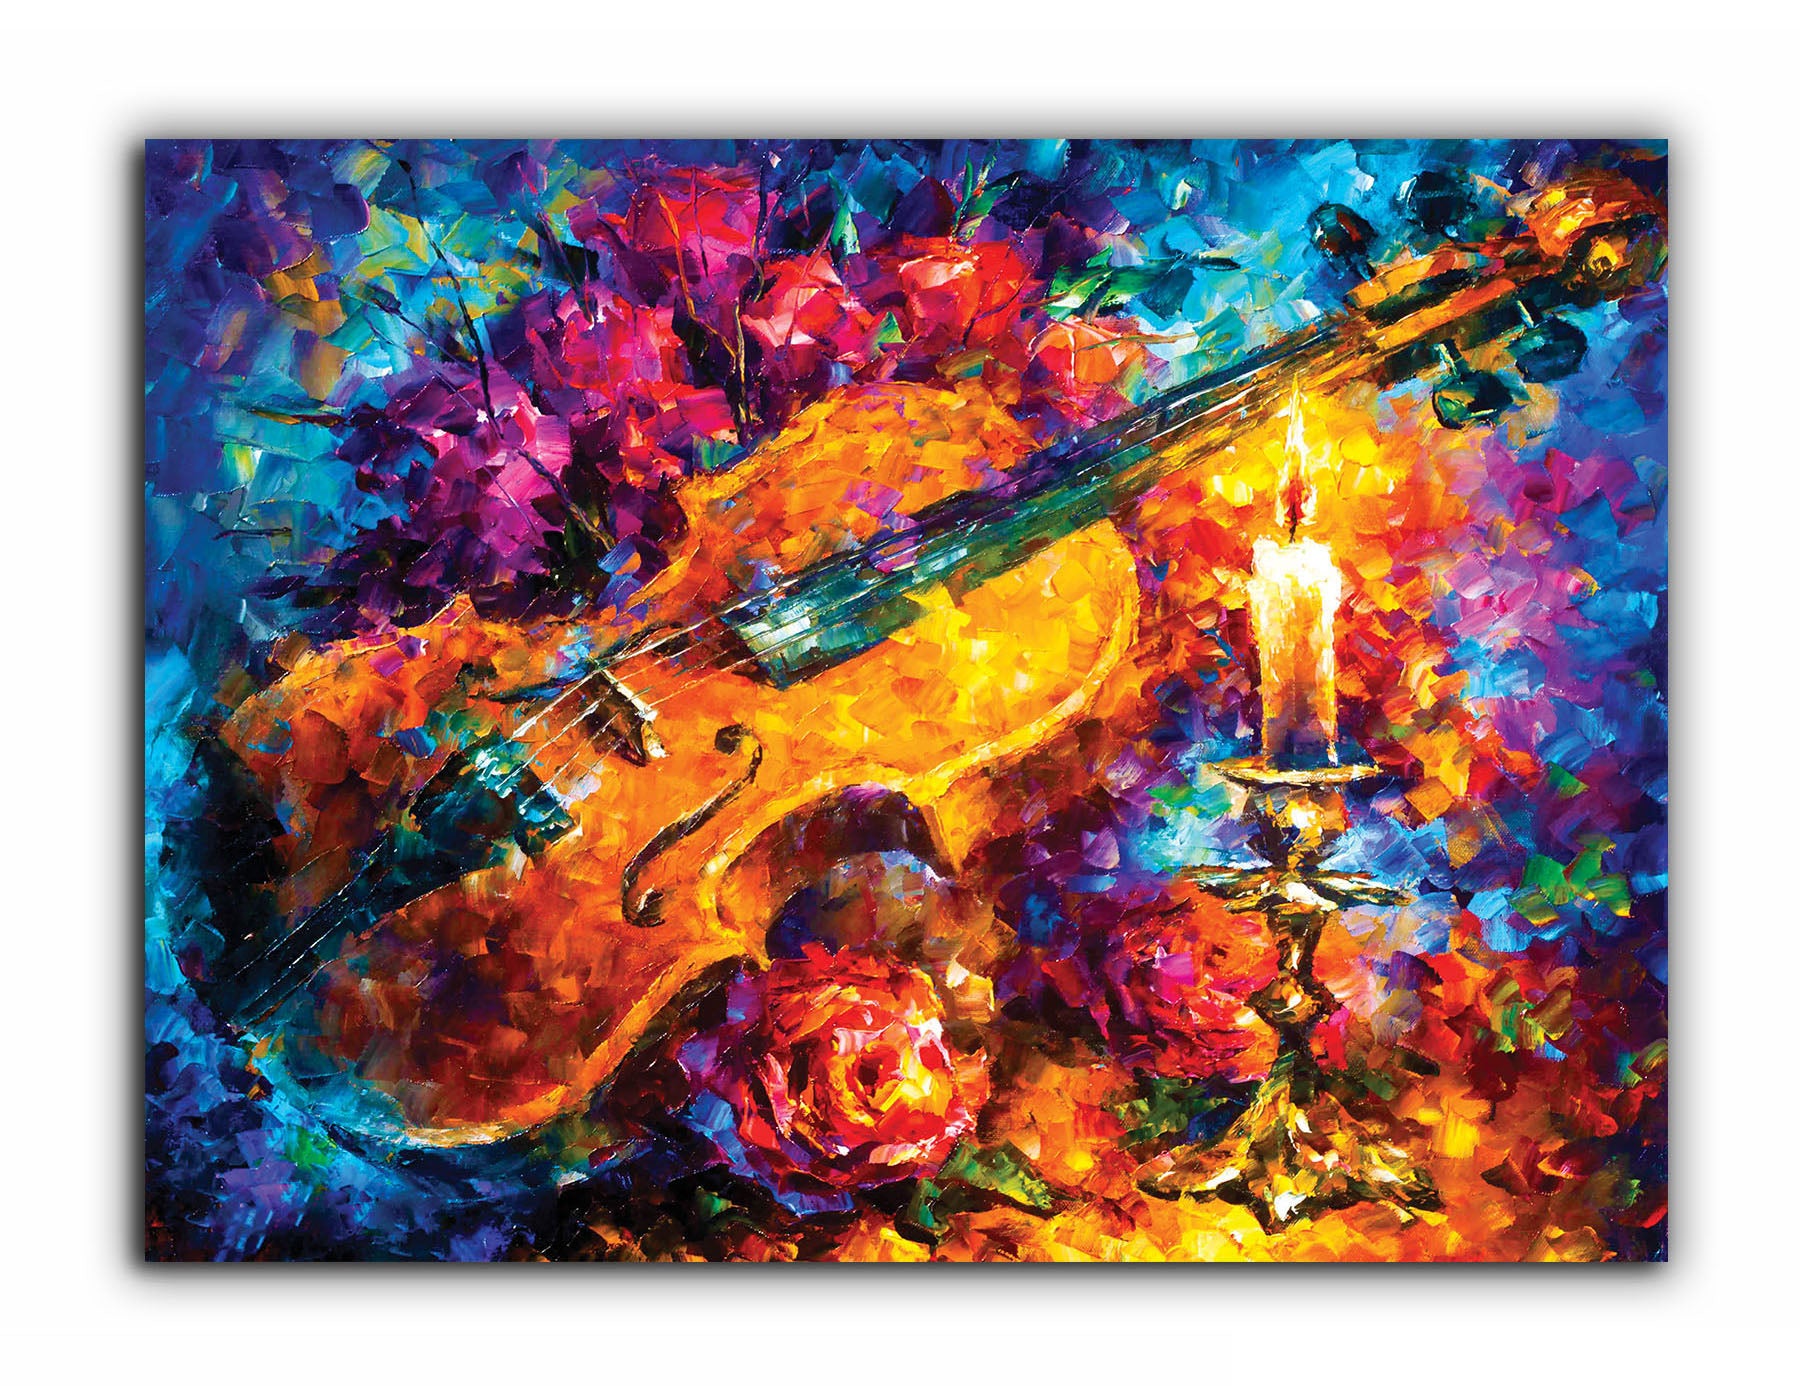 Violin in the Candlelight - Unframed Canvas Painting